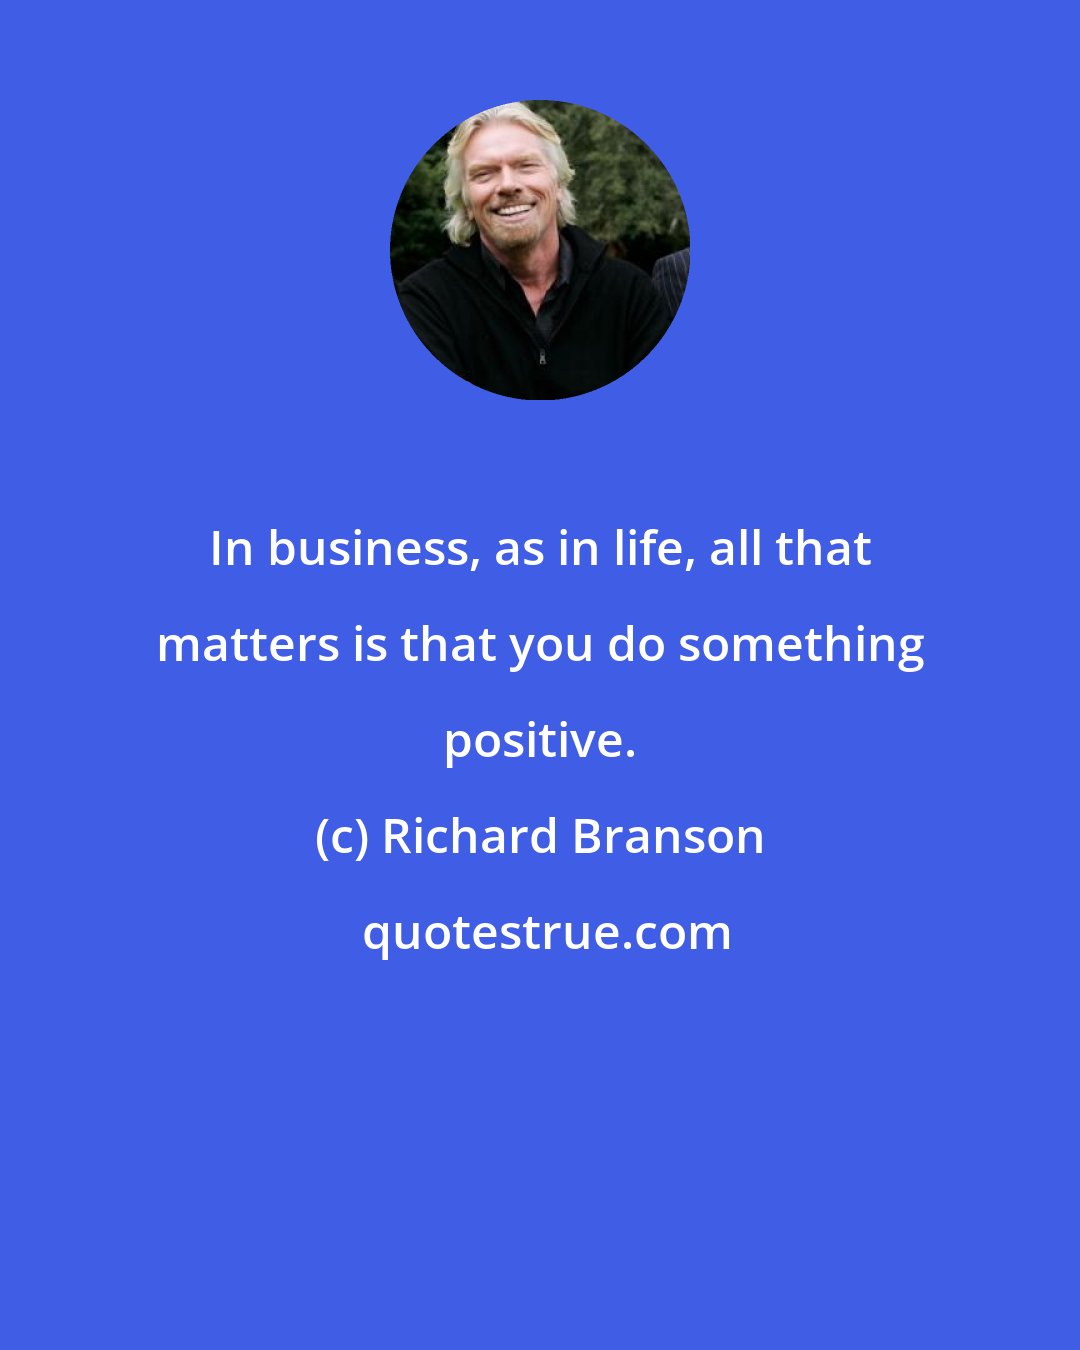 Richard Branson: In business, as in life, all that matters is that you do something positive.